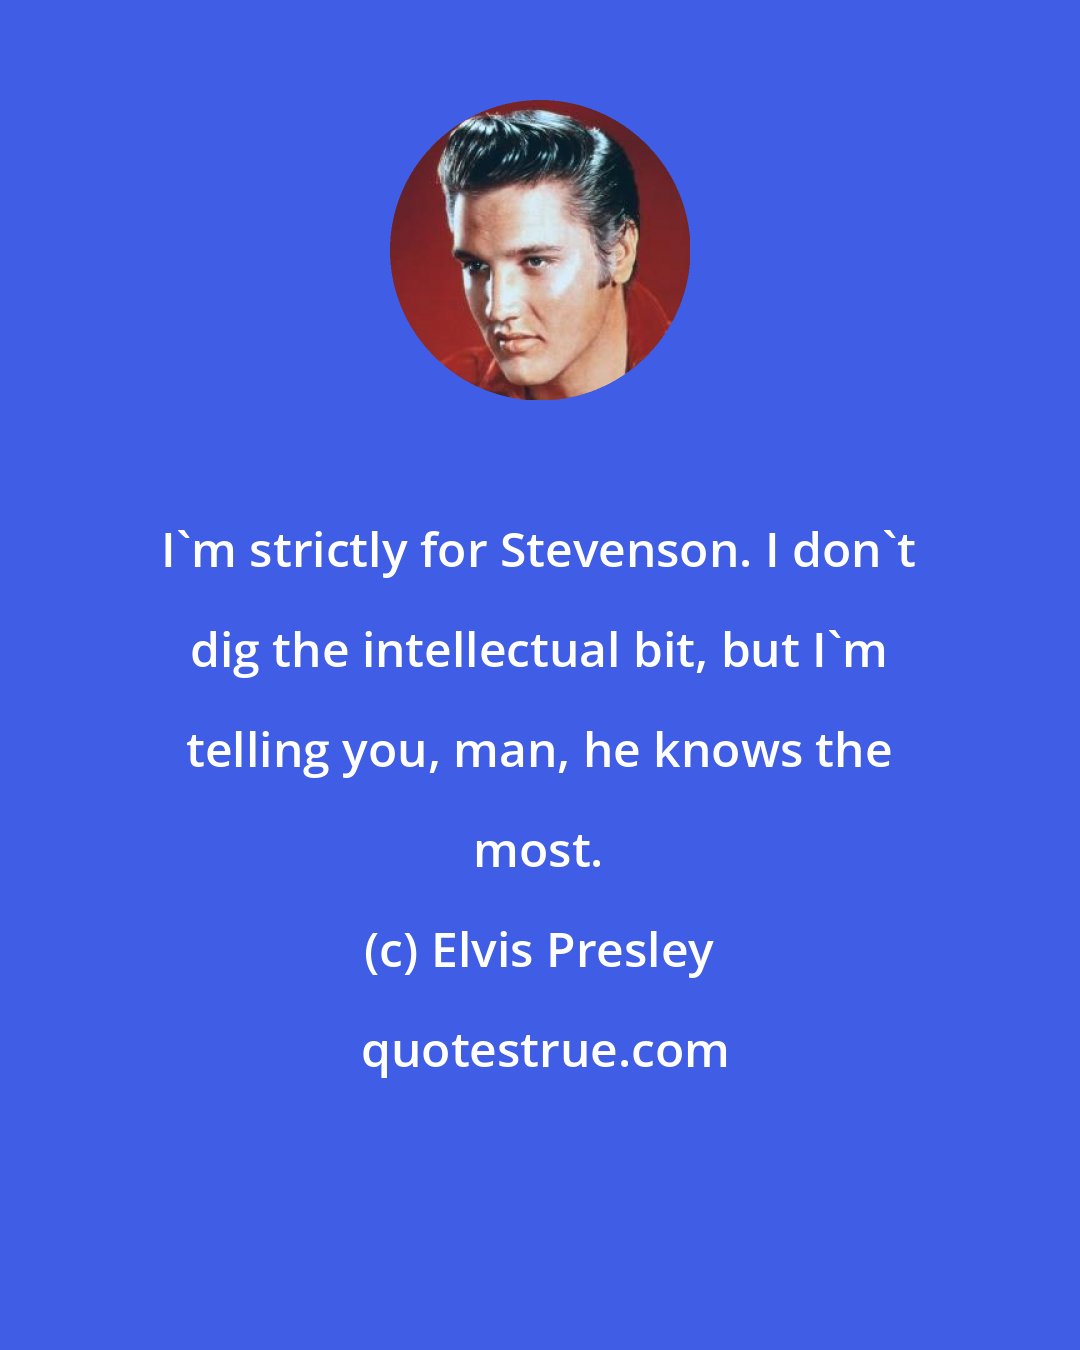 Elvis Presley: I'm strictly for Stevenson. I don't dig the intellectual bit, but I'm telling you, man, he knows the most.